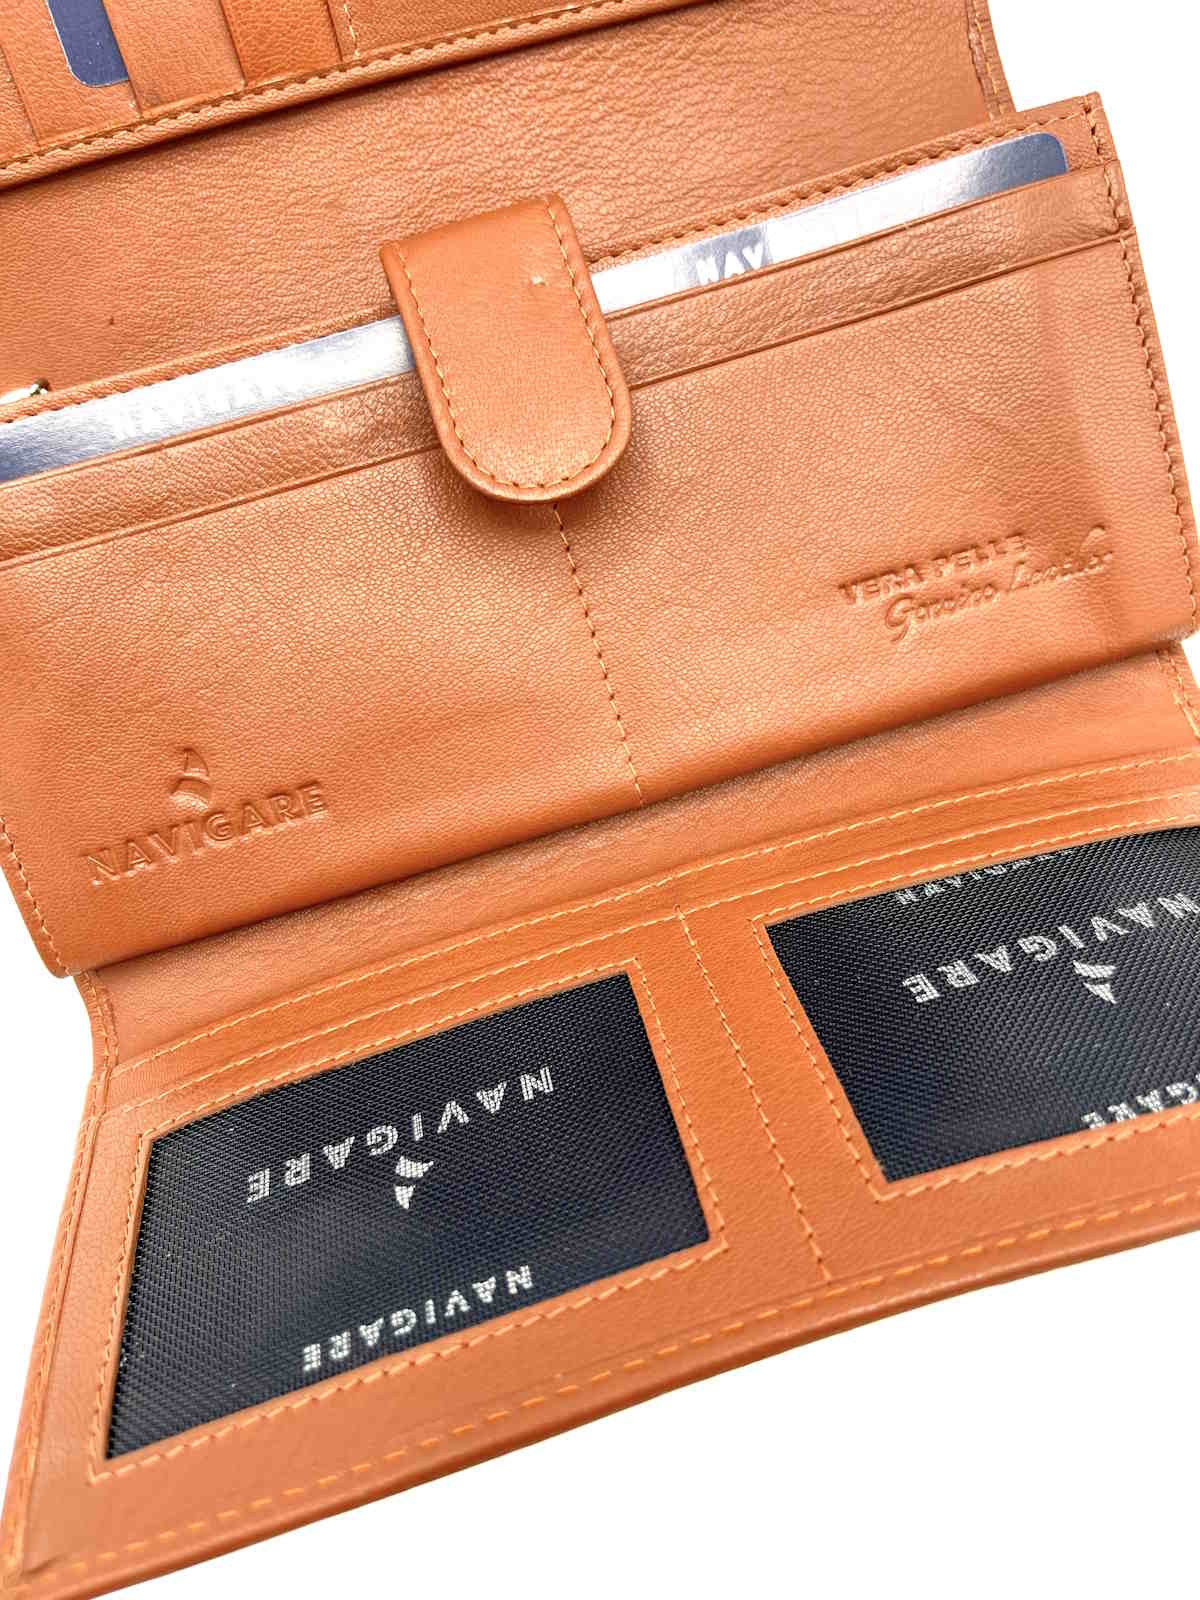 Genuine leather wallet, Navigare for women, art. PF792-58